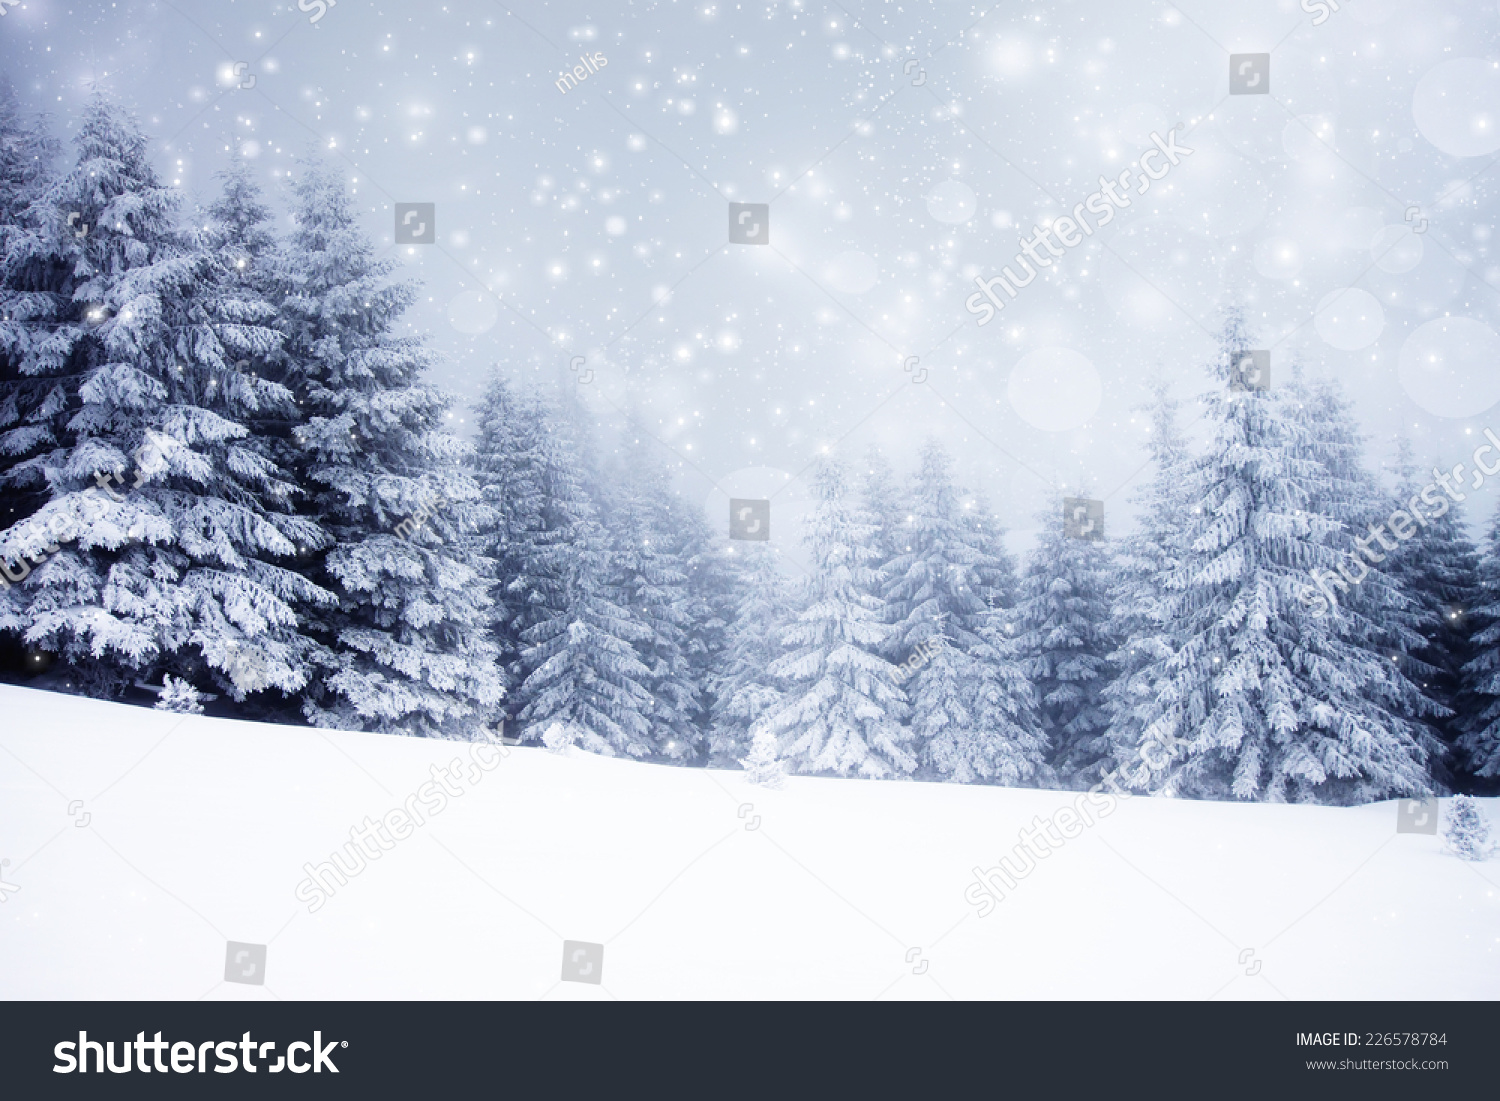 Christmas background with snowy fir trees  #226578784